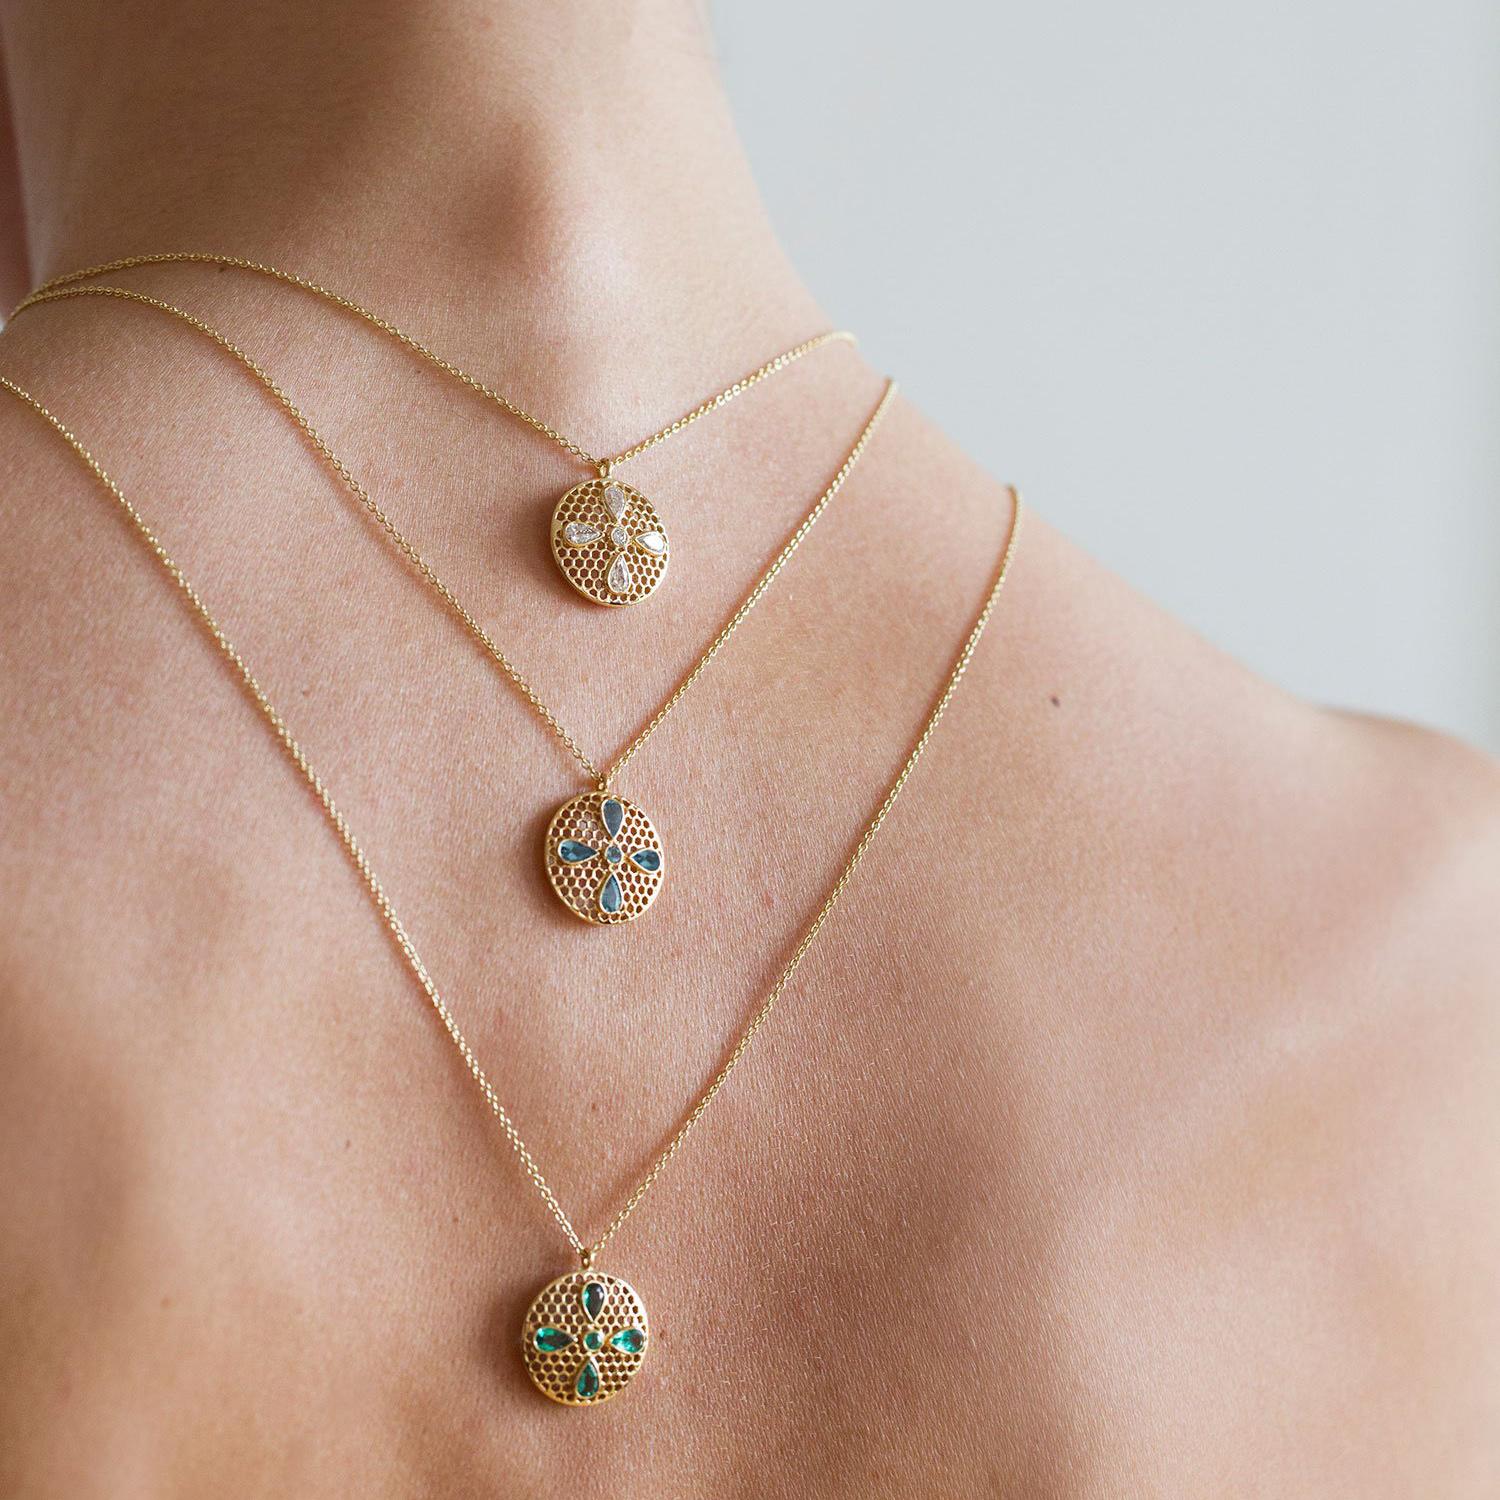 Handcrafted Emeralds and 18 Karat Yellow Gold Pendant Necklace. Our bejewelled four leaf clover rests on our hand pierced gold lace as a symbol of eternal blessing. Can be worn both with a casual outfit for an every day look or with a more elegant